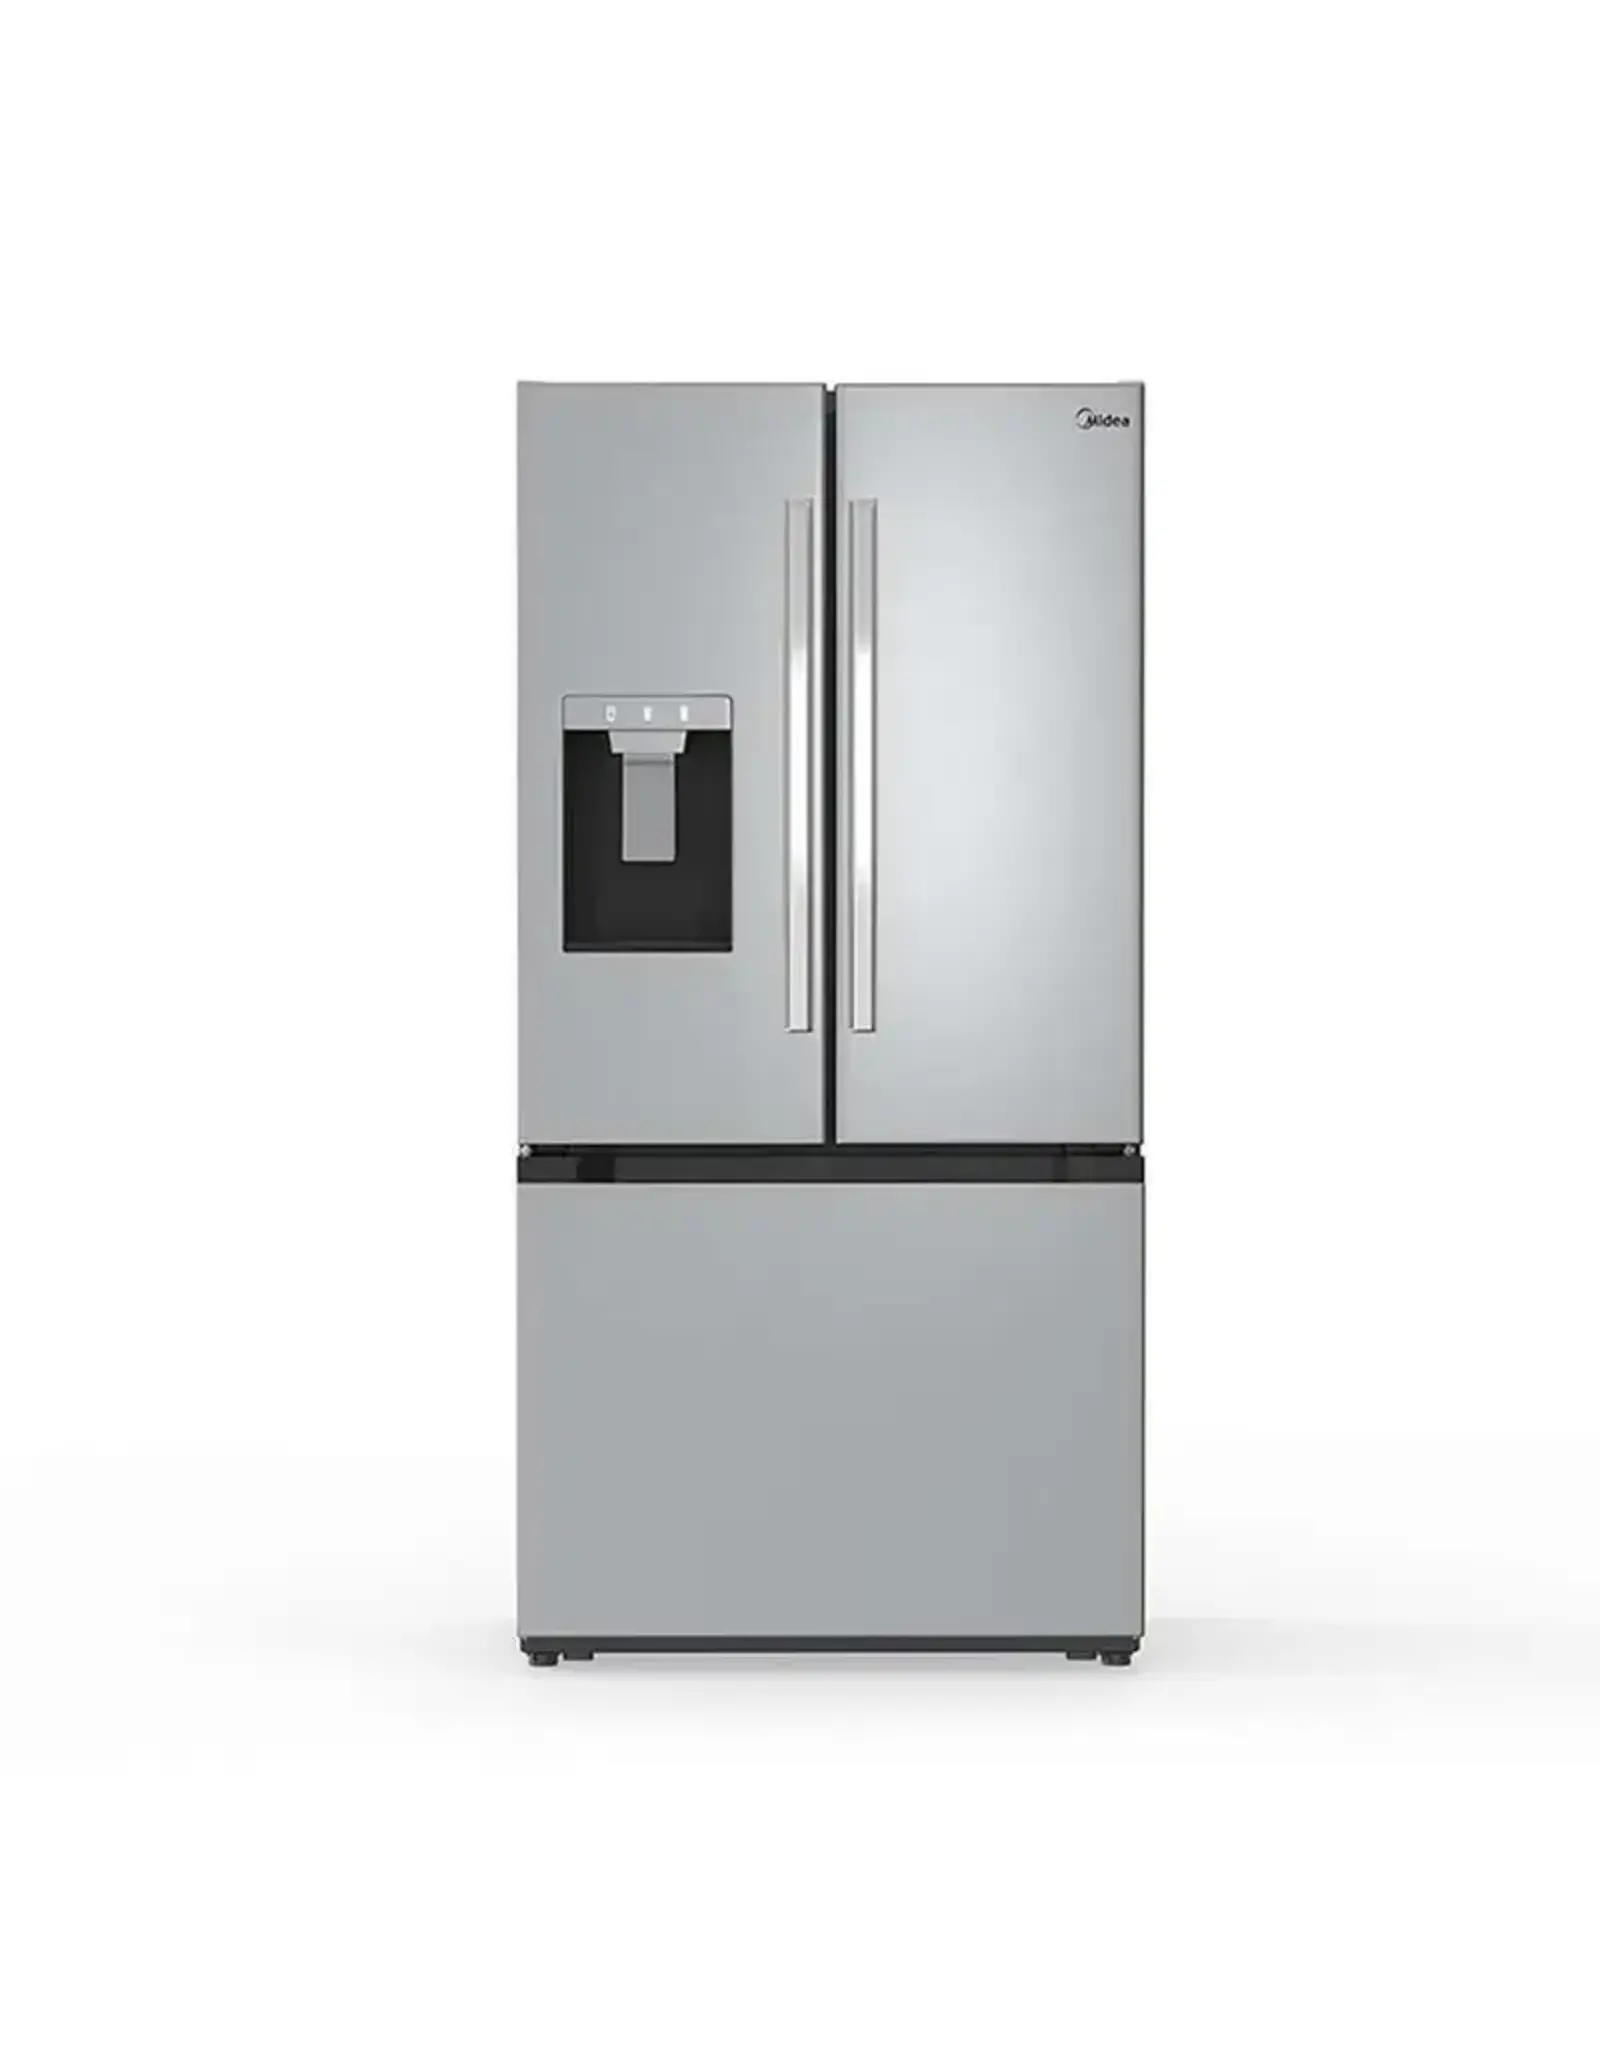 Midea Midea 29.3-cu ft Smart French Door Refrigerator with Dual Ice Maker, Water and Ice Dispenser (Stainless Steel) ENERGY STAR